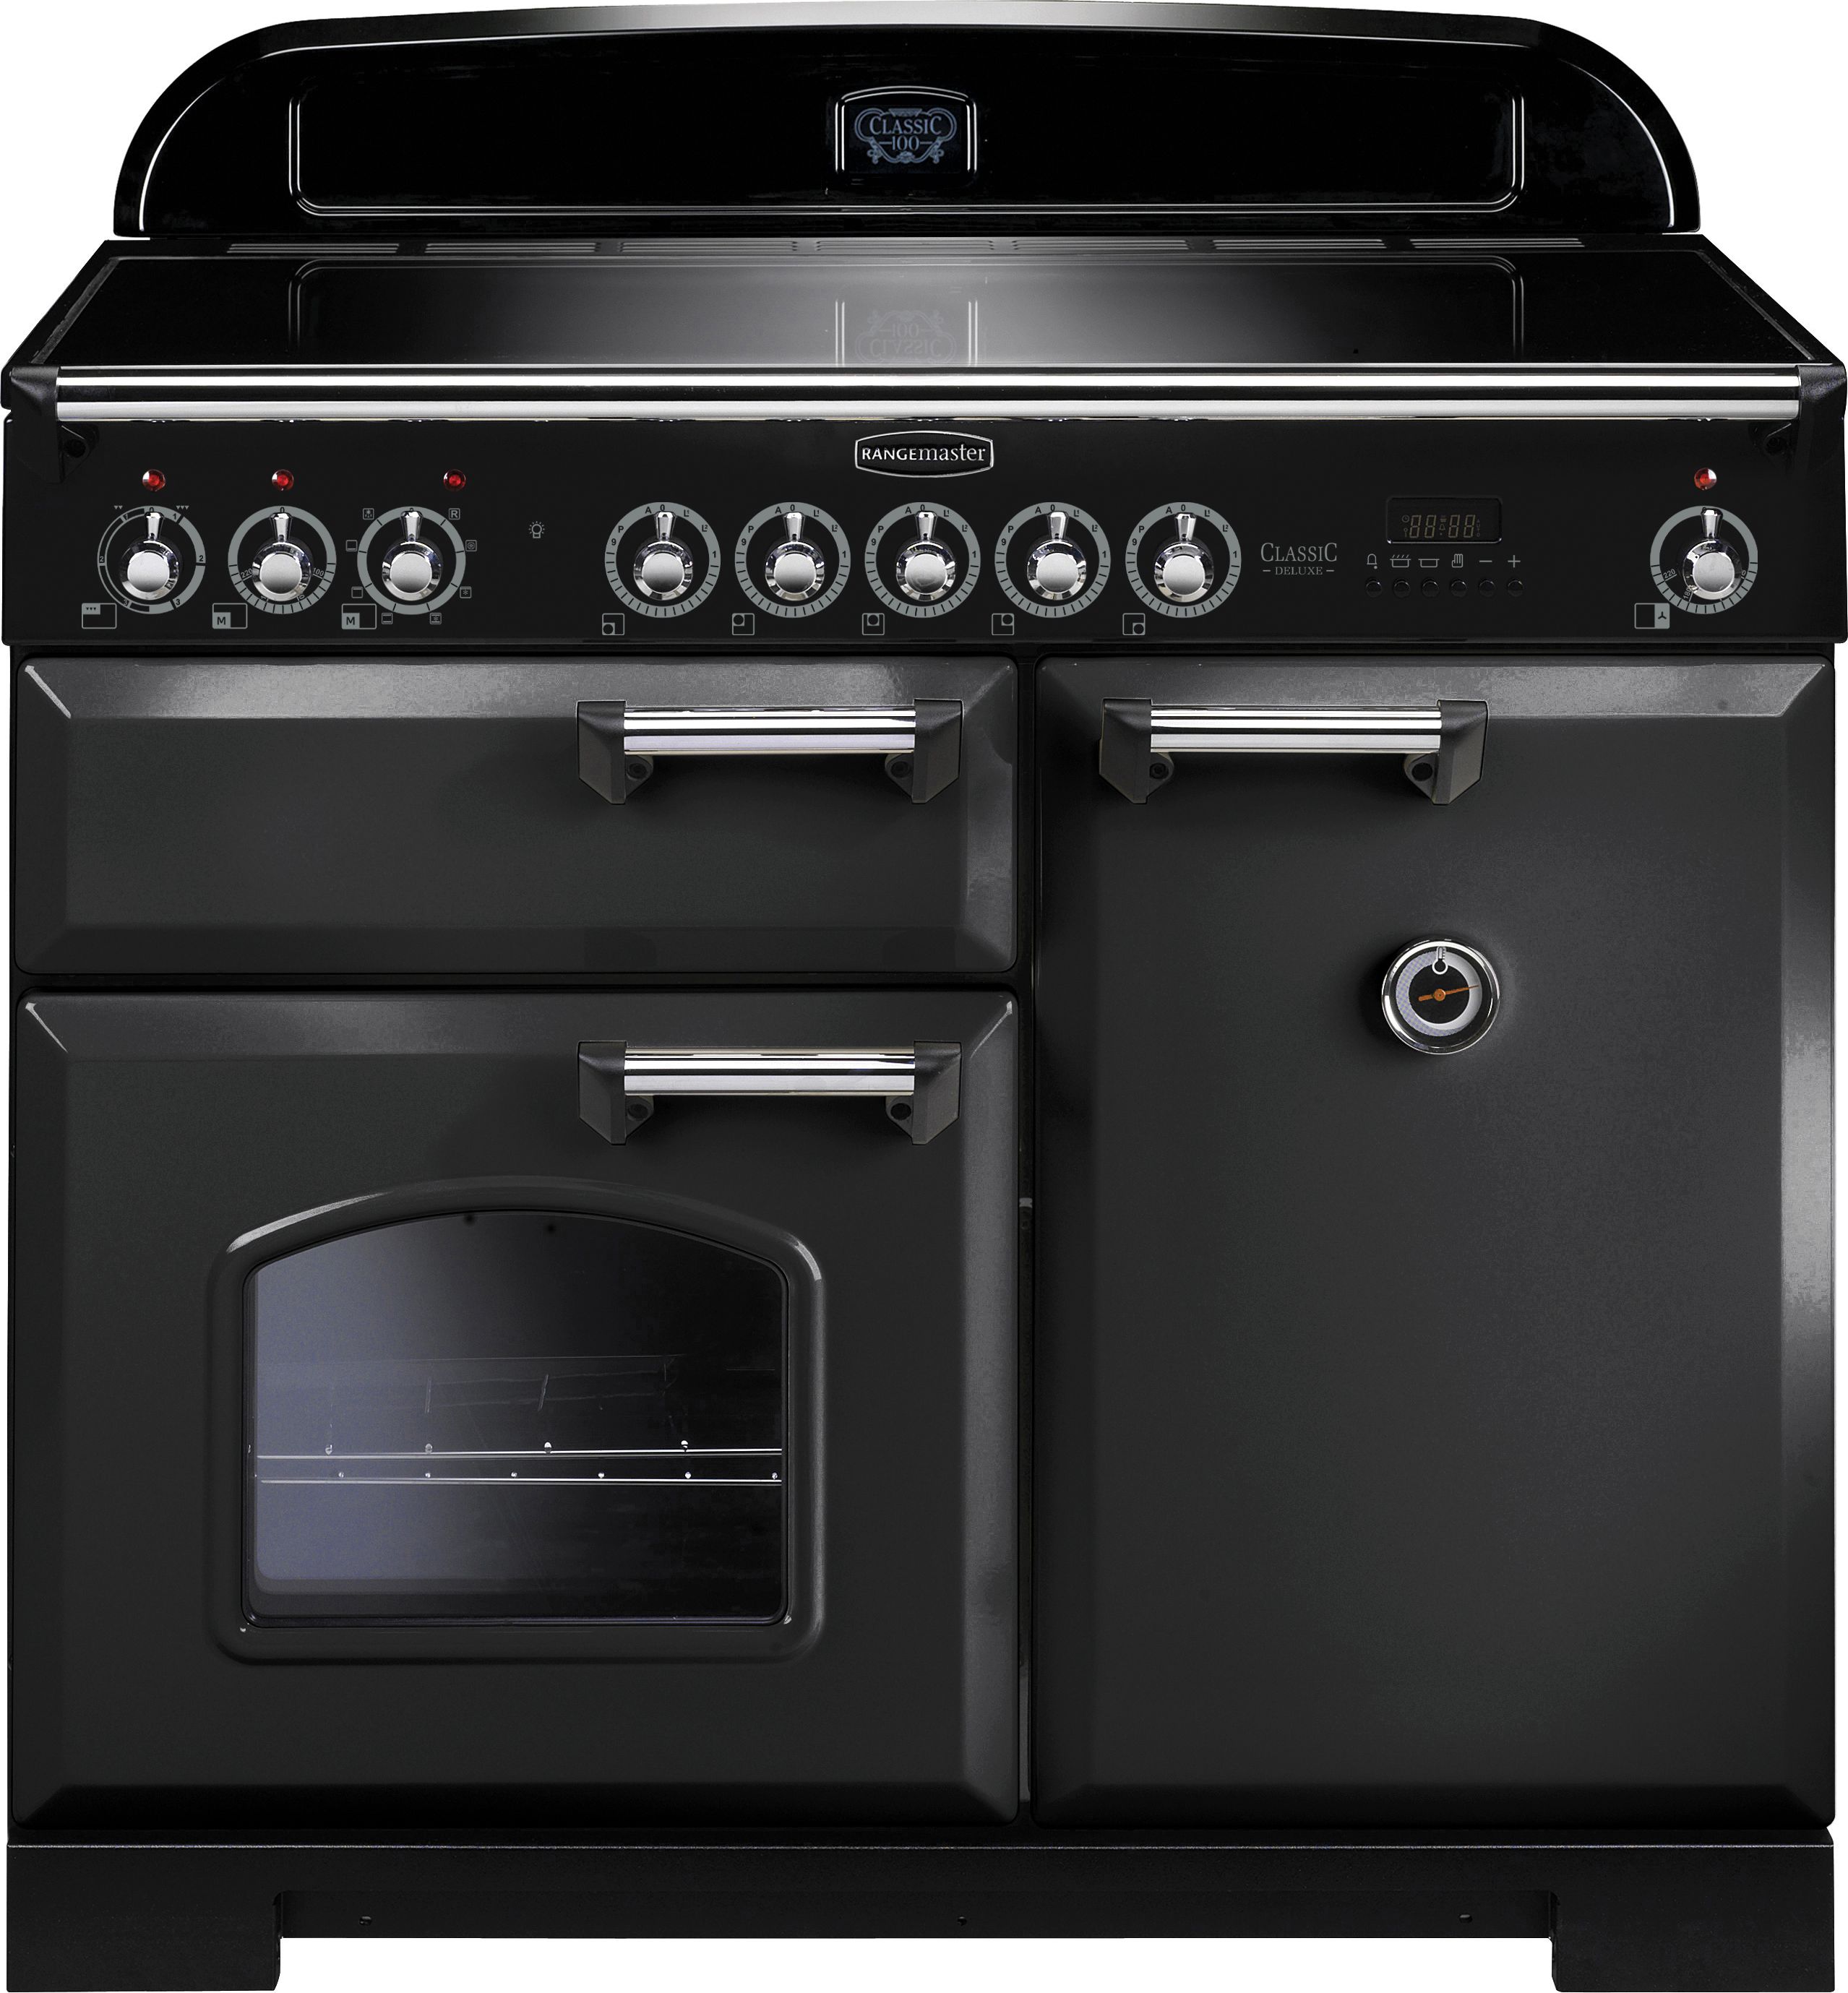 Rangemaster Classic Deluxe CDL100EICB/C 100cm Electric Range Cooker with Induction Hob - Charcoal Black / Chrome - A/A Rated, Black